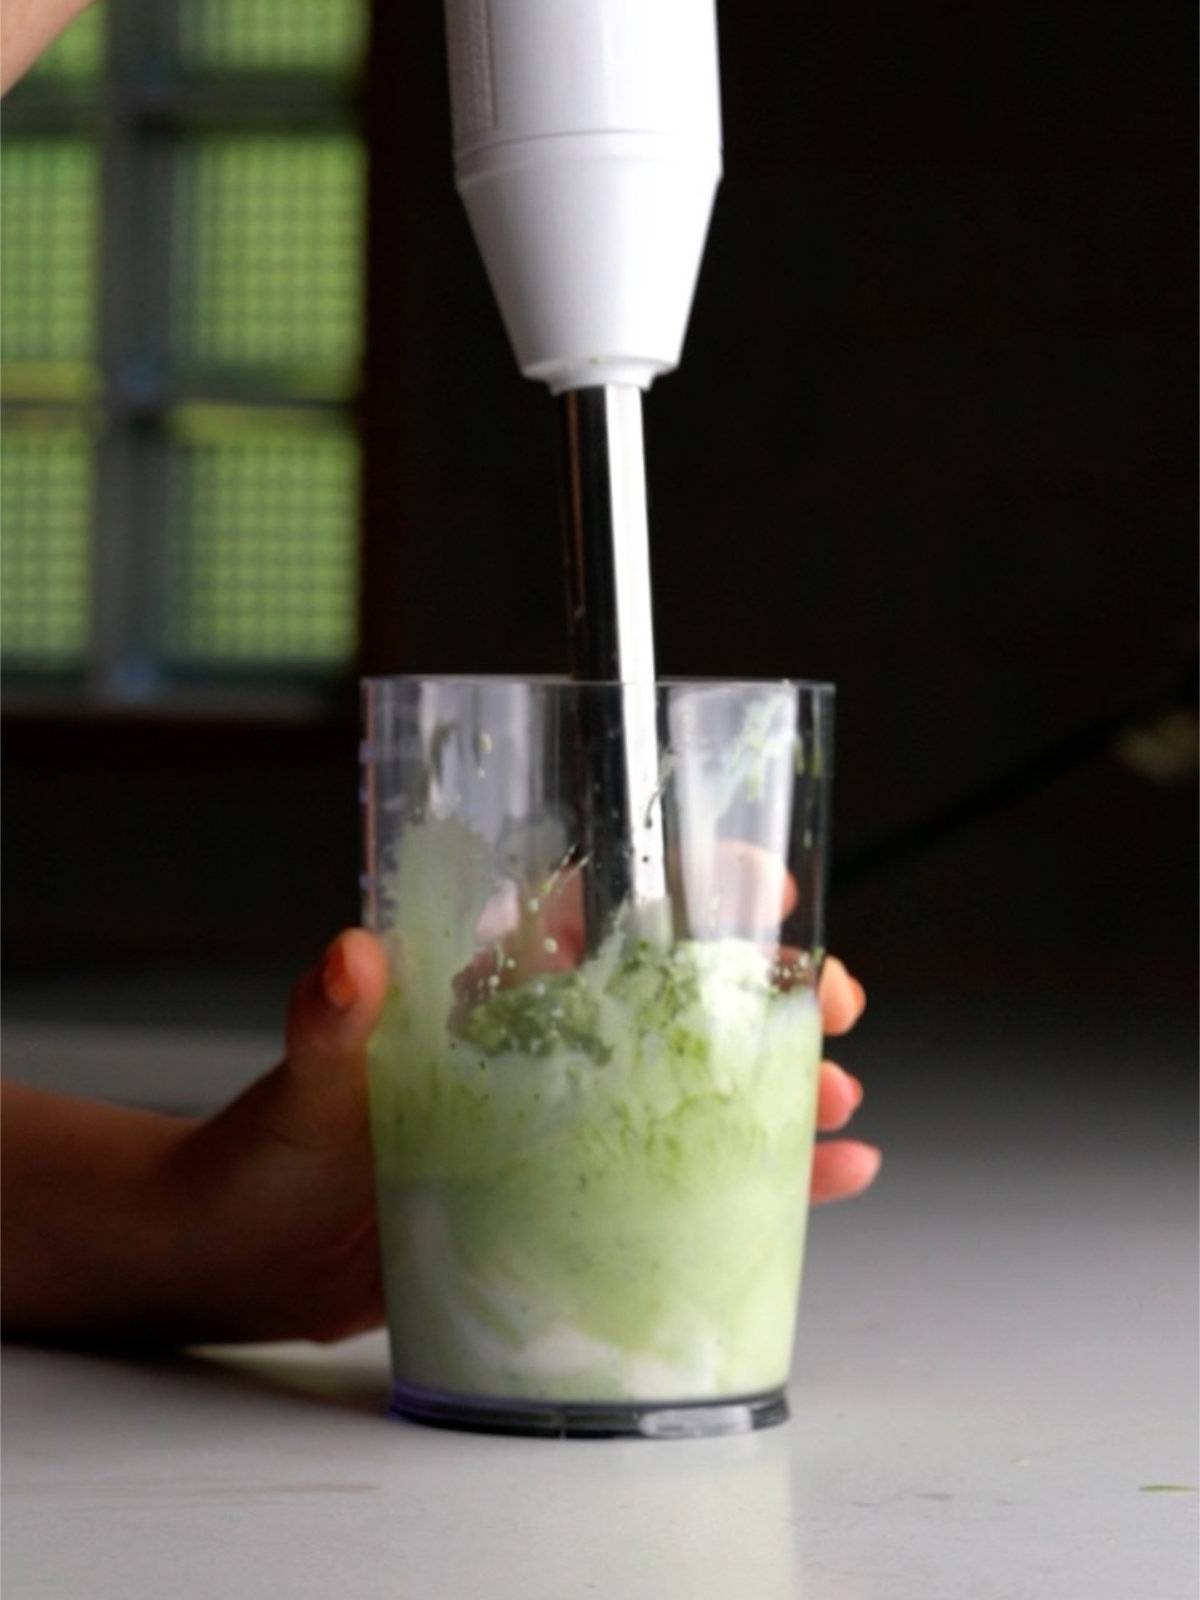 Blending vanilla ice cream with green matcha in a clear plastic container.